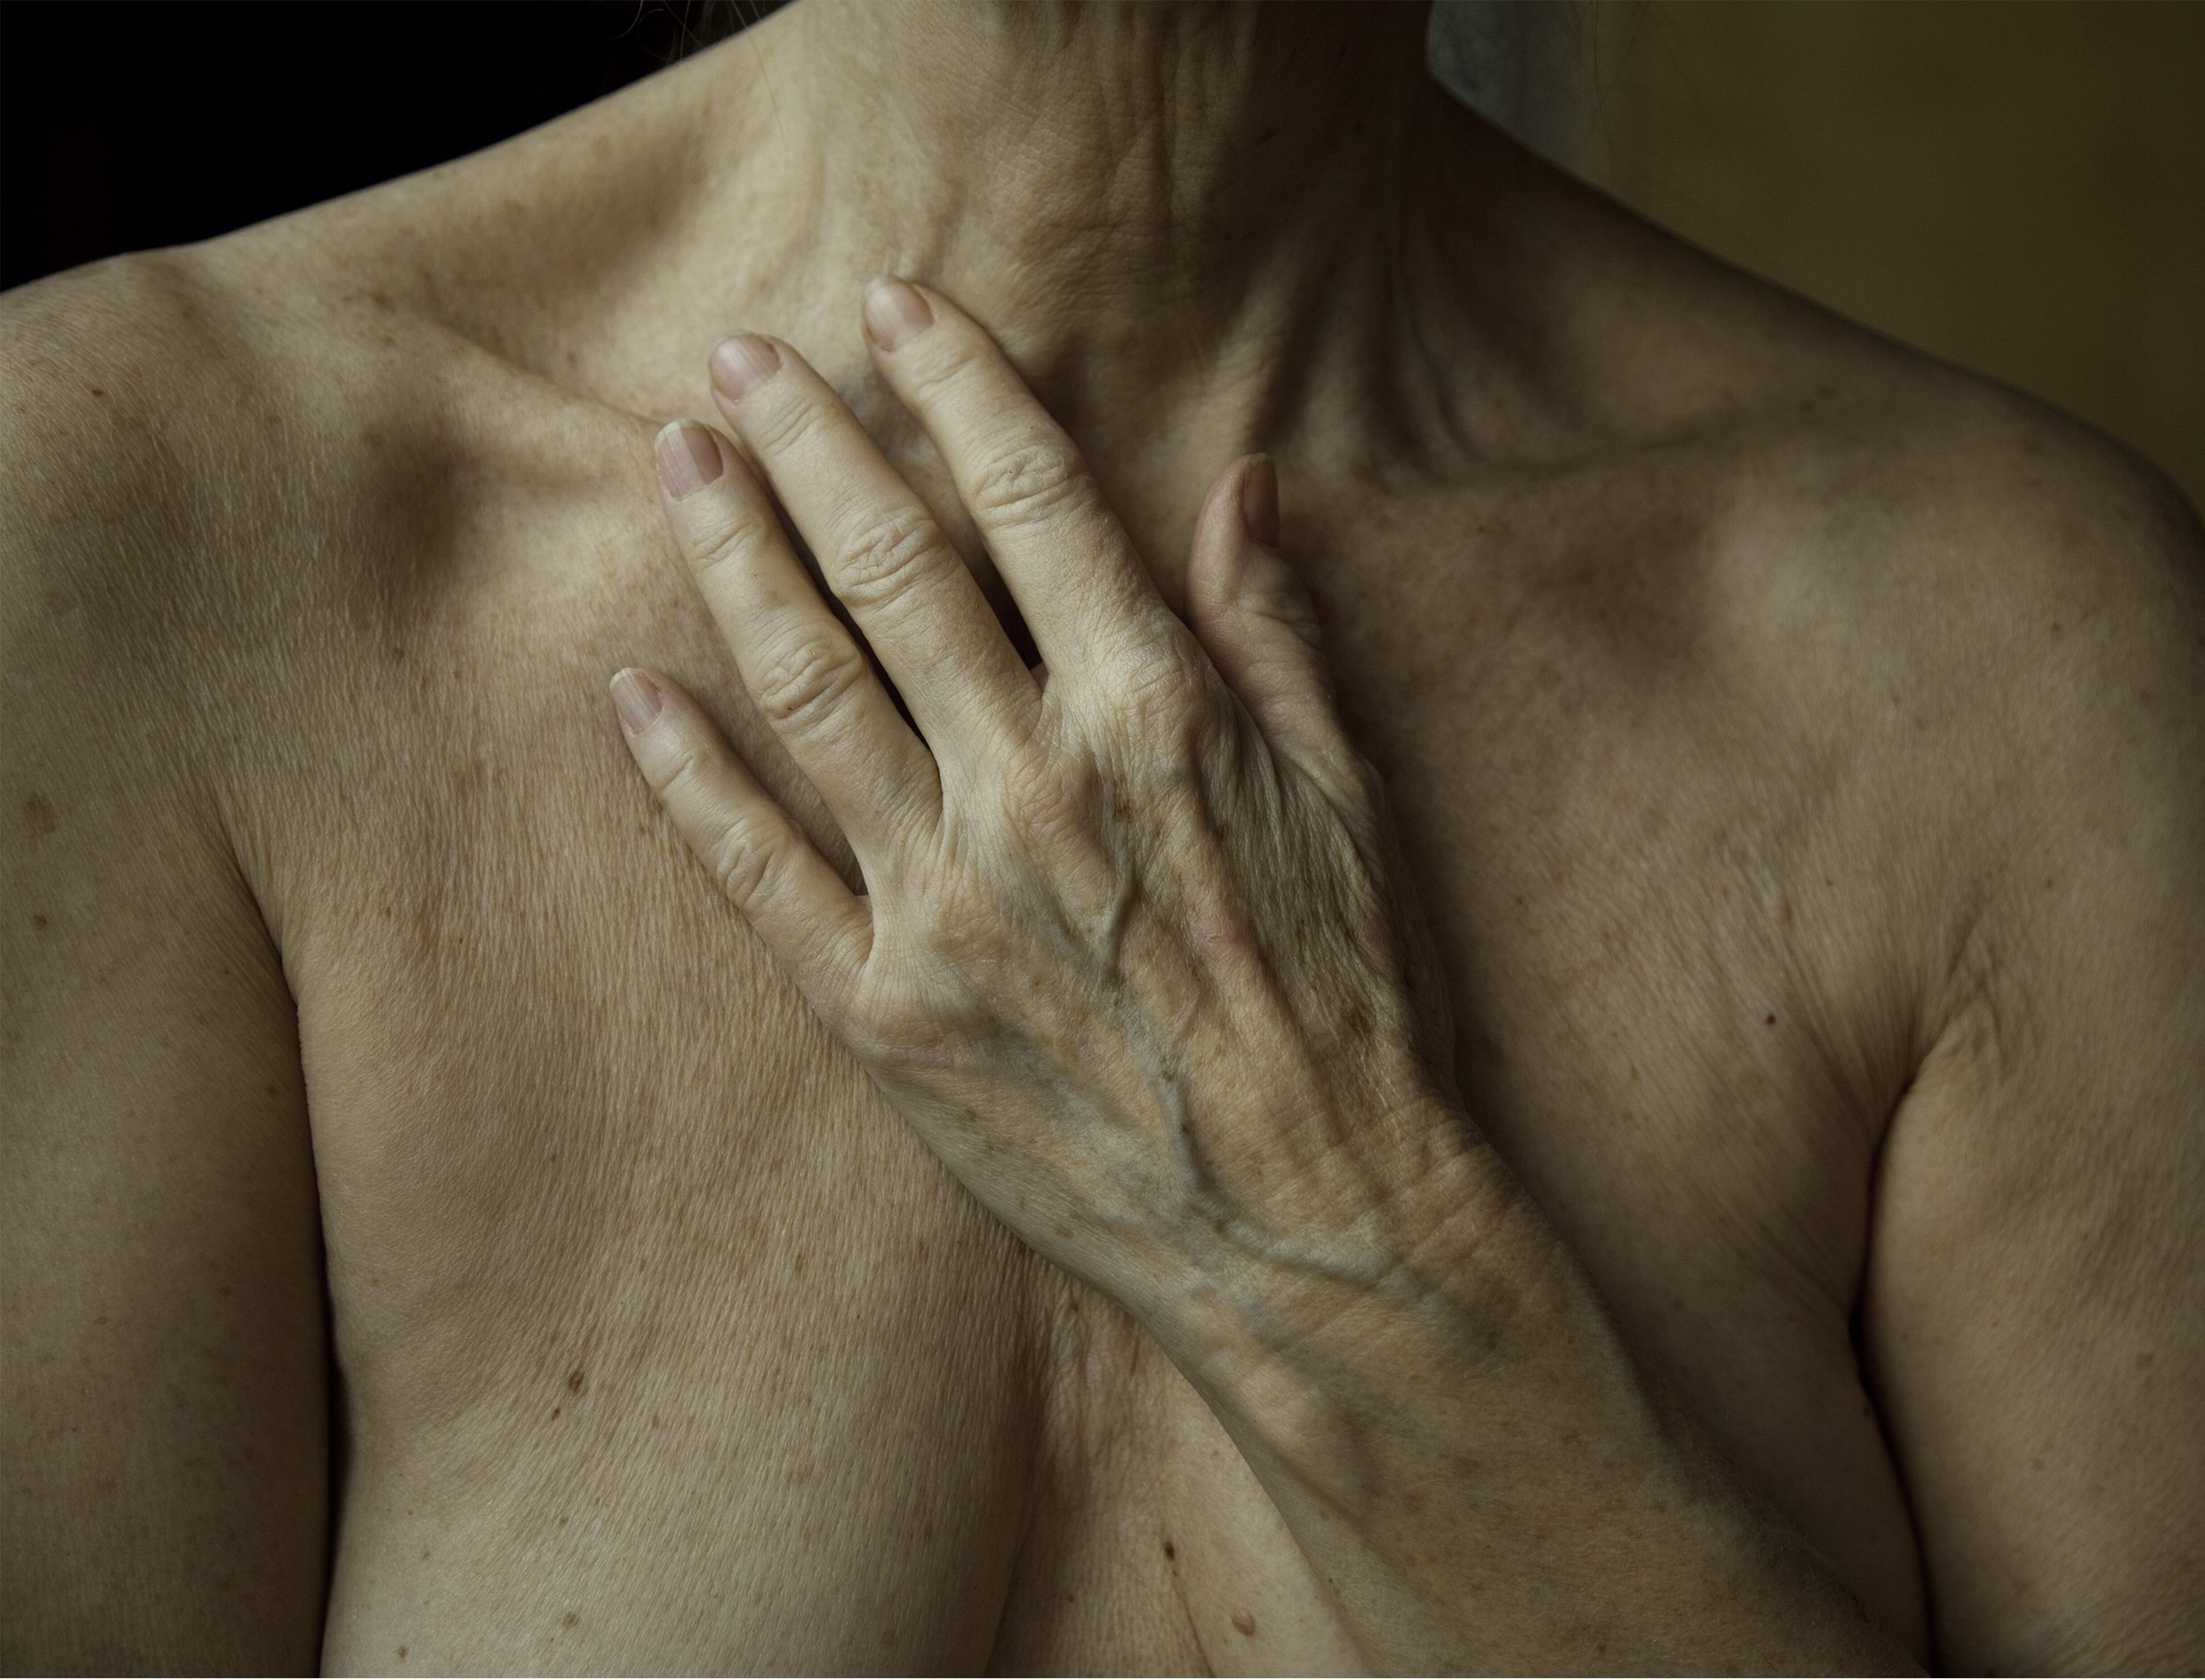  Marna Clarke,  Hand on Chest,  2010, archival digital print, courtesy and copyright of the artist. 